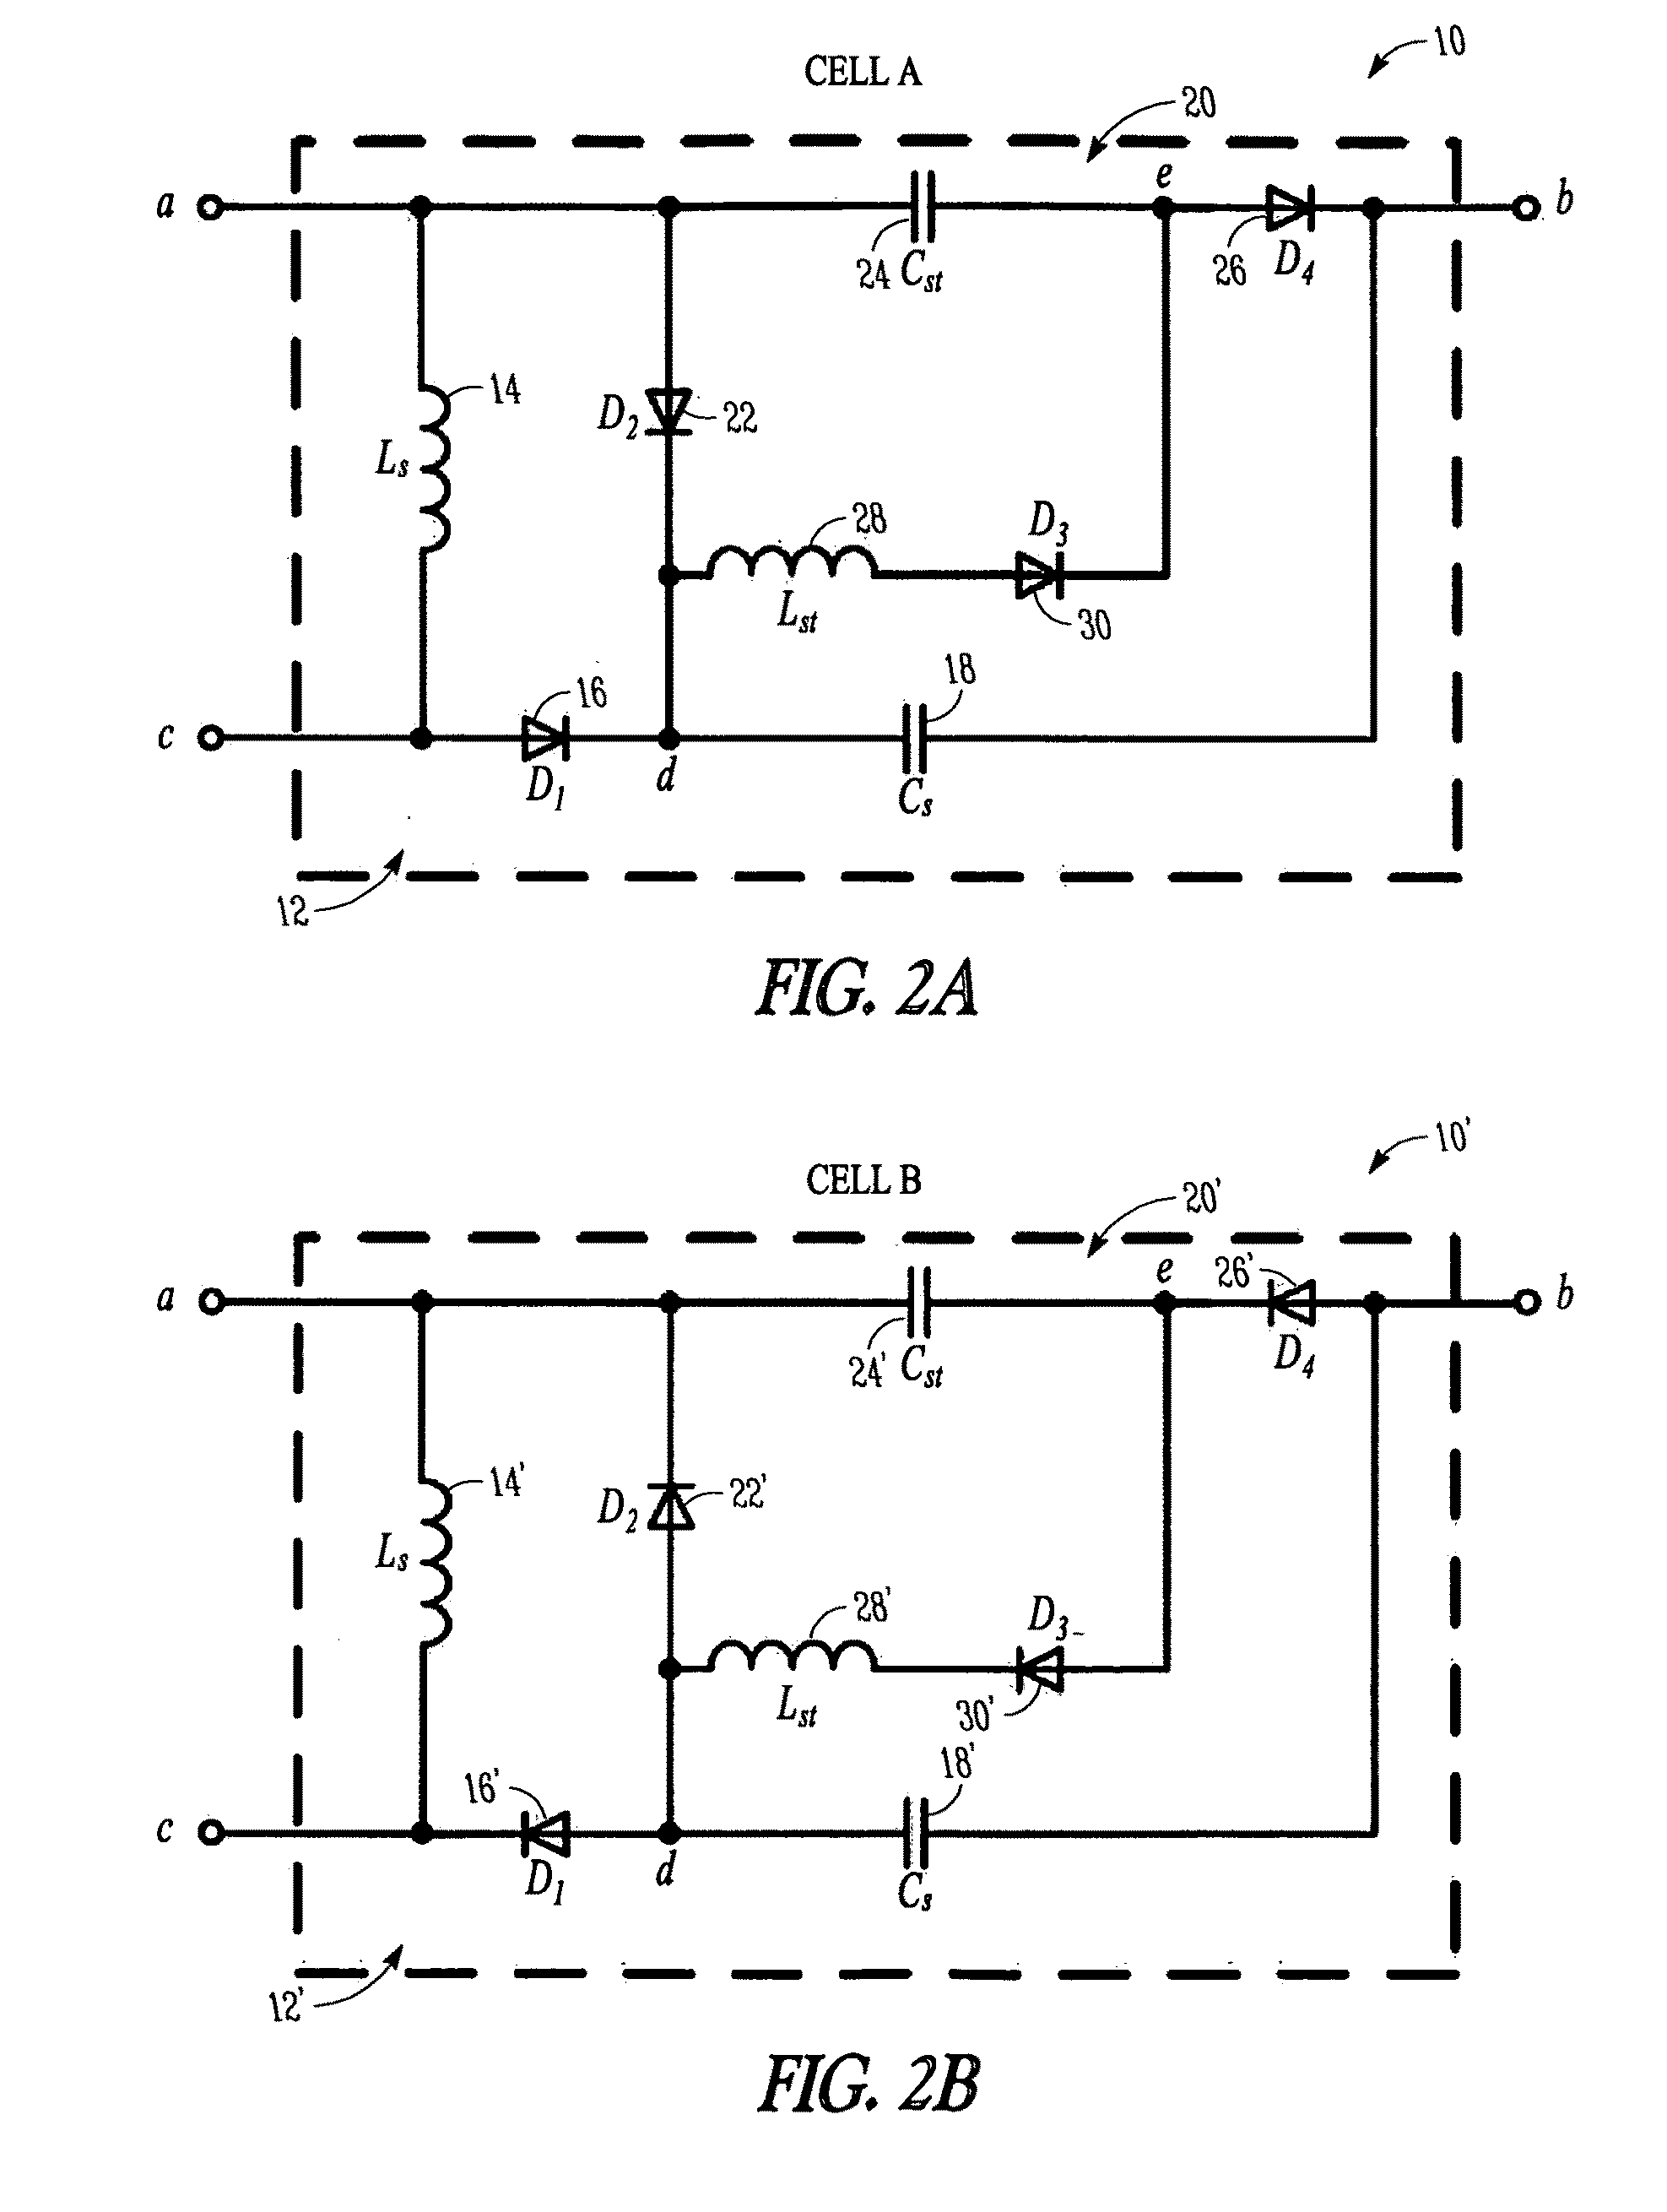 Passive lossless snubber cell for a power converter